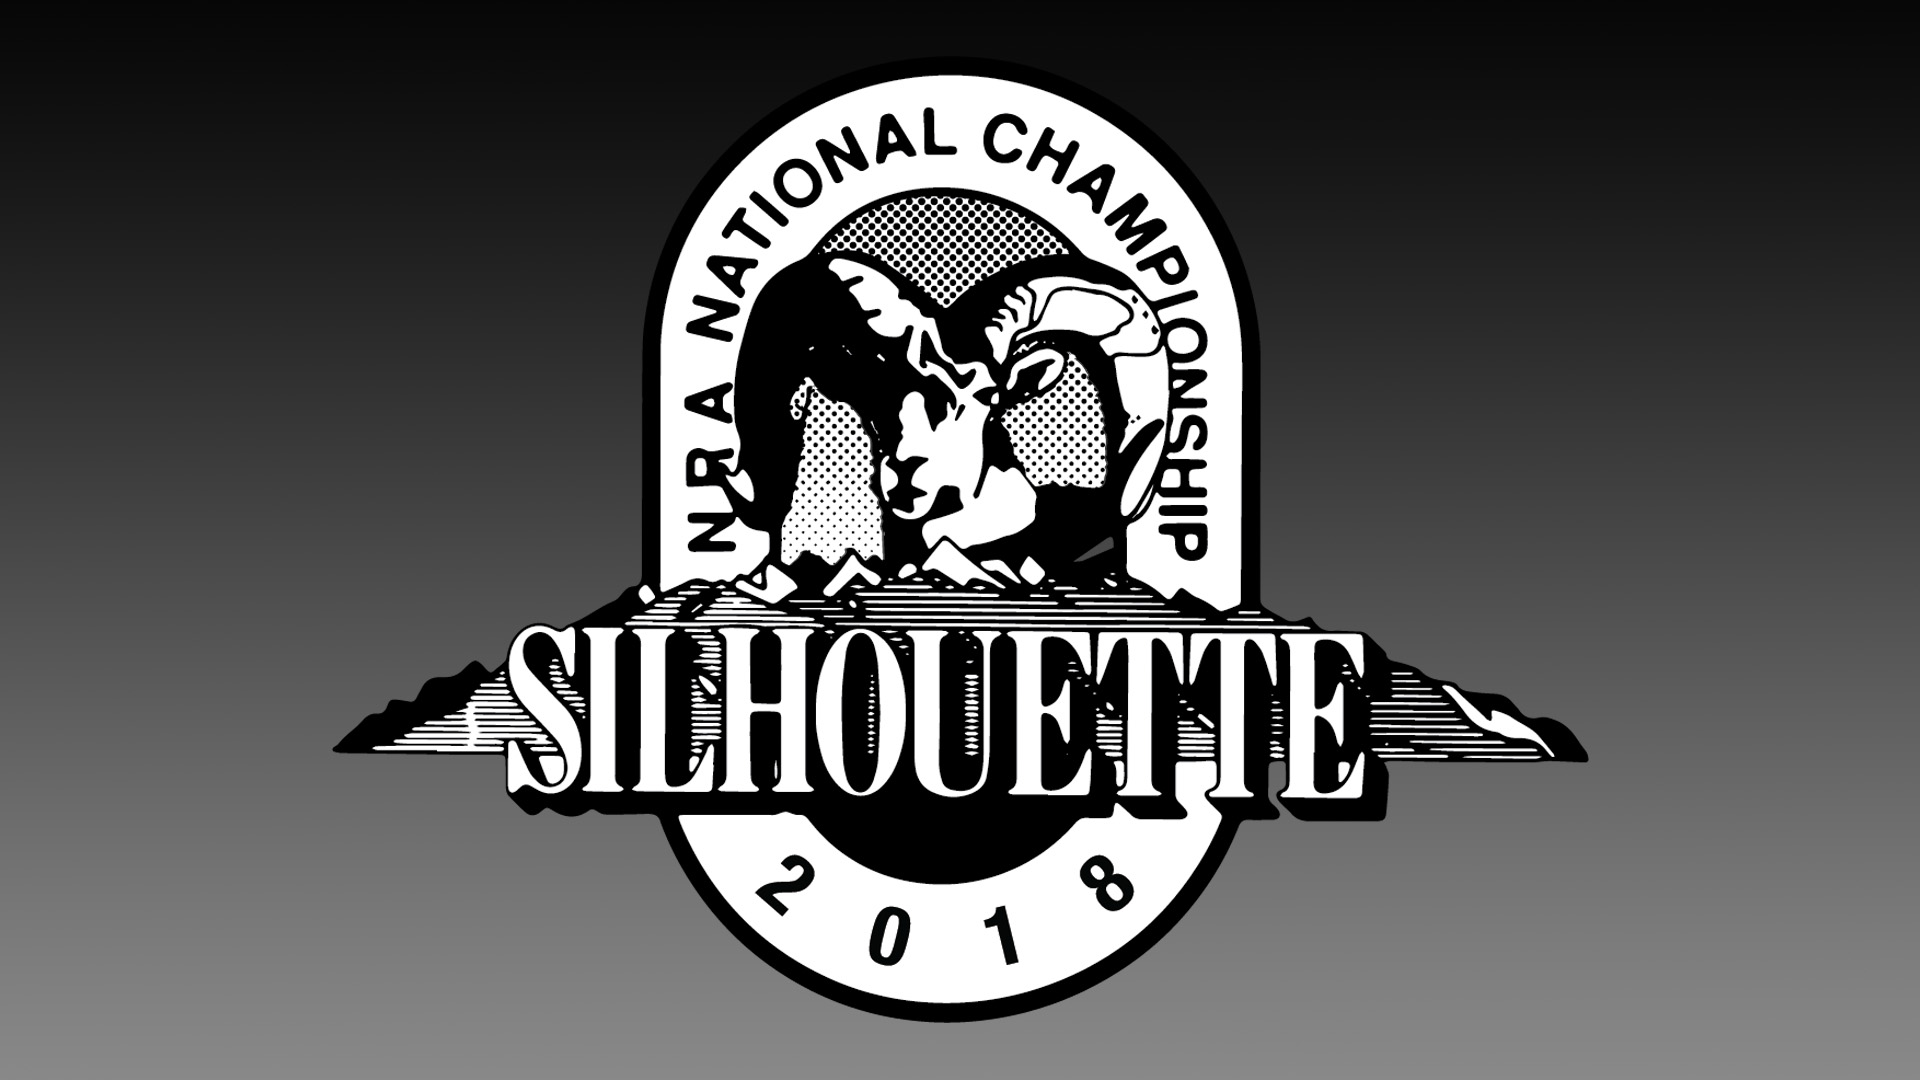 Registration Open For 2018 NRA Silhouette National Championships at NRA Whittington Center!